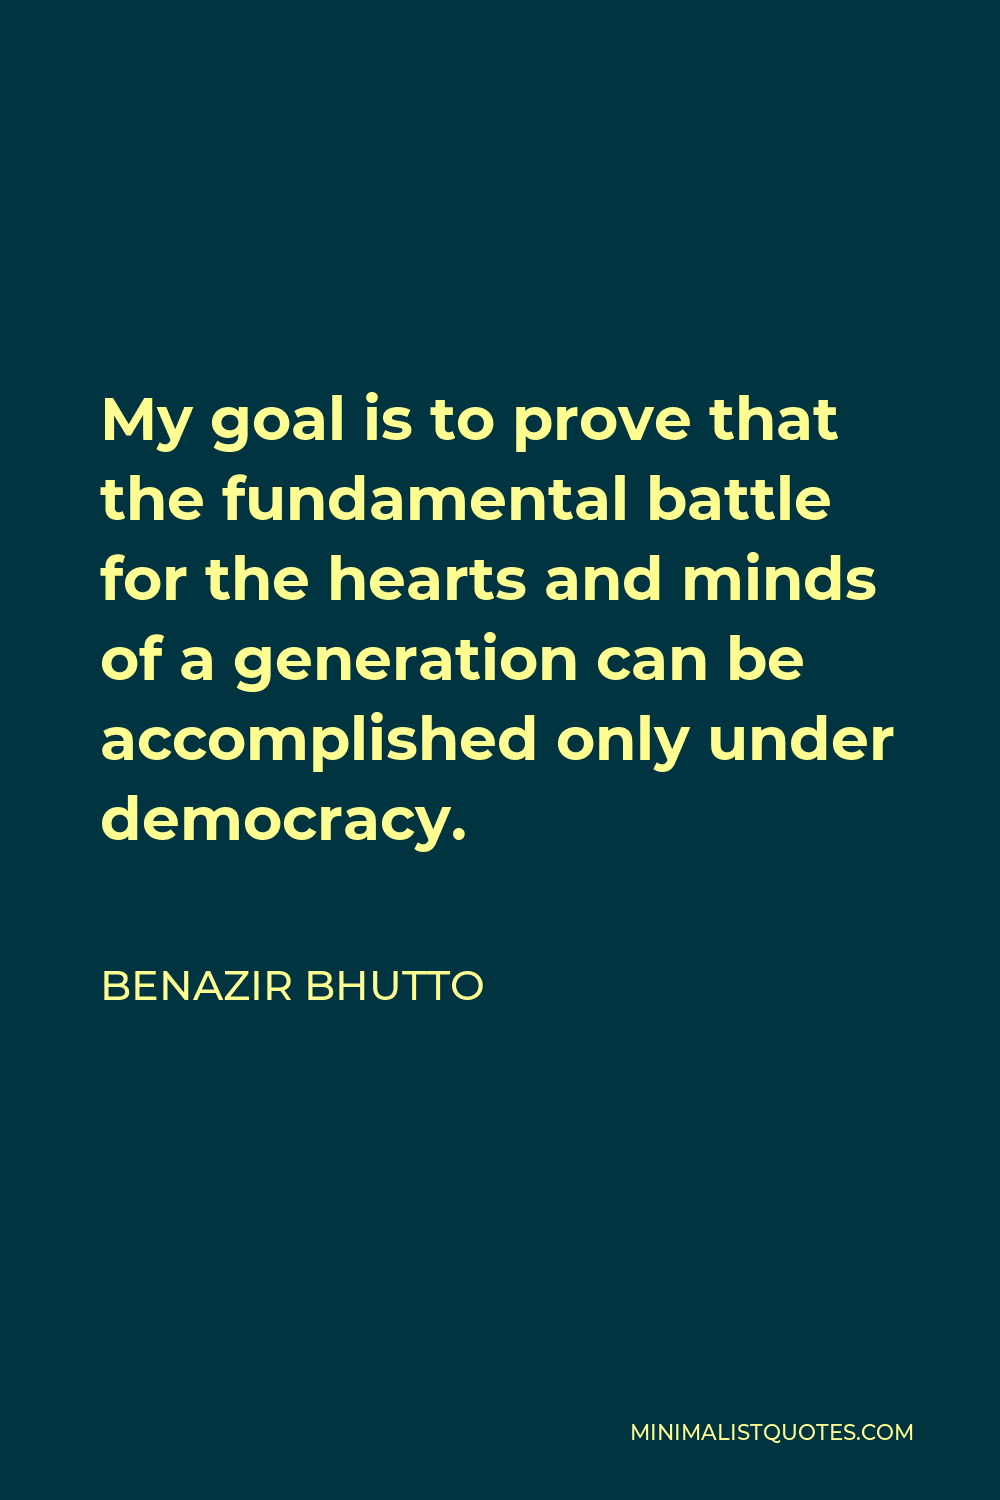 Benazir Bhutto Quote - My goal is to prove that the fundamental battle for the hearts and minds of a generation can be accomplished only under democracy.